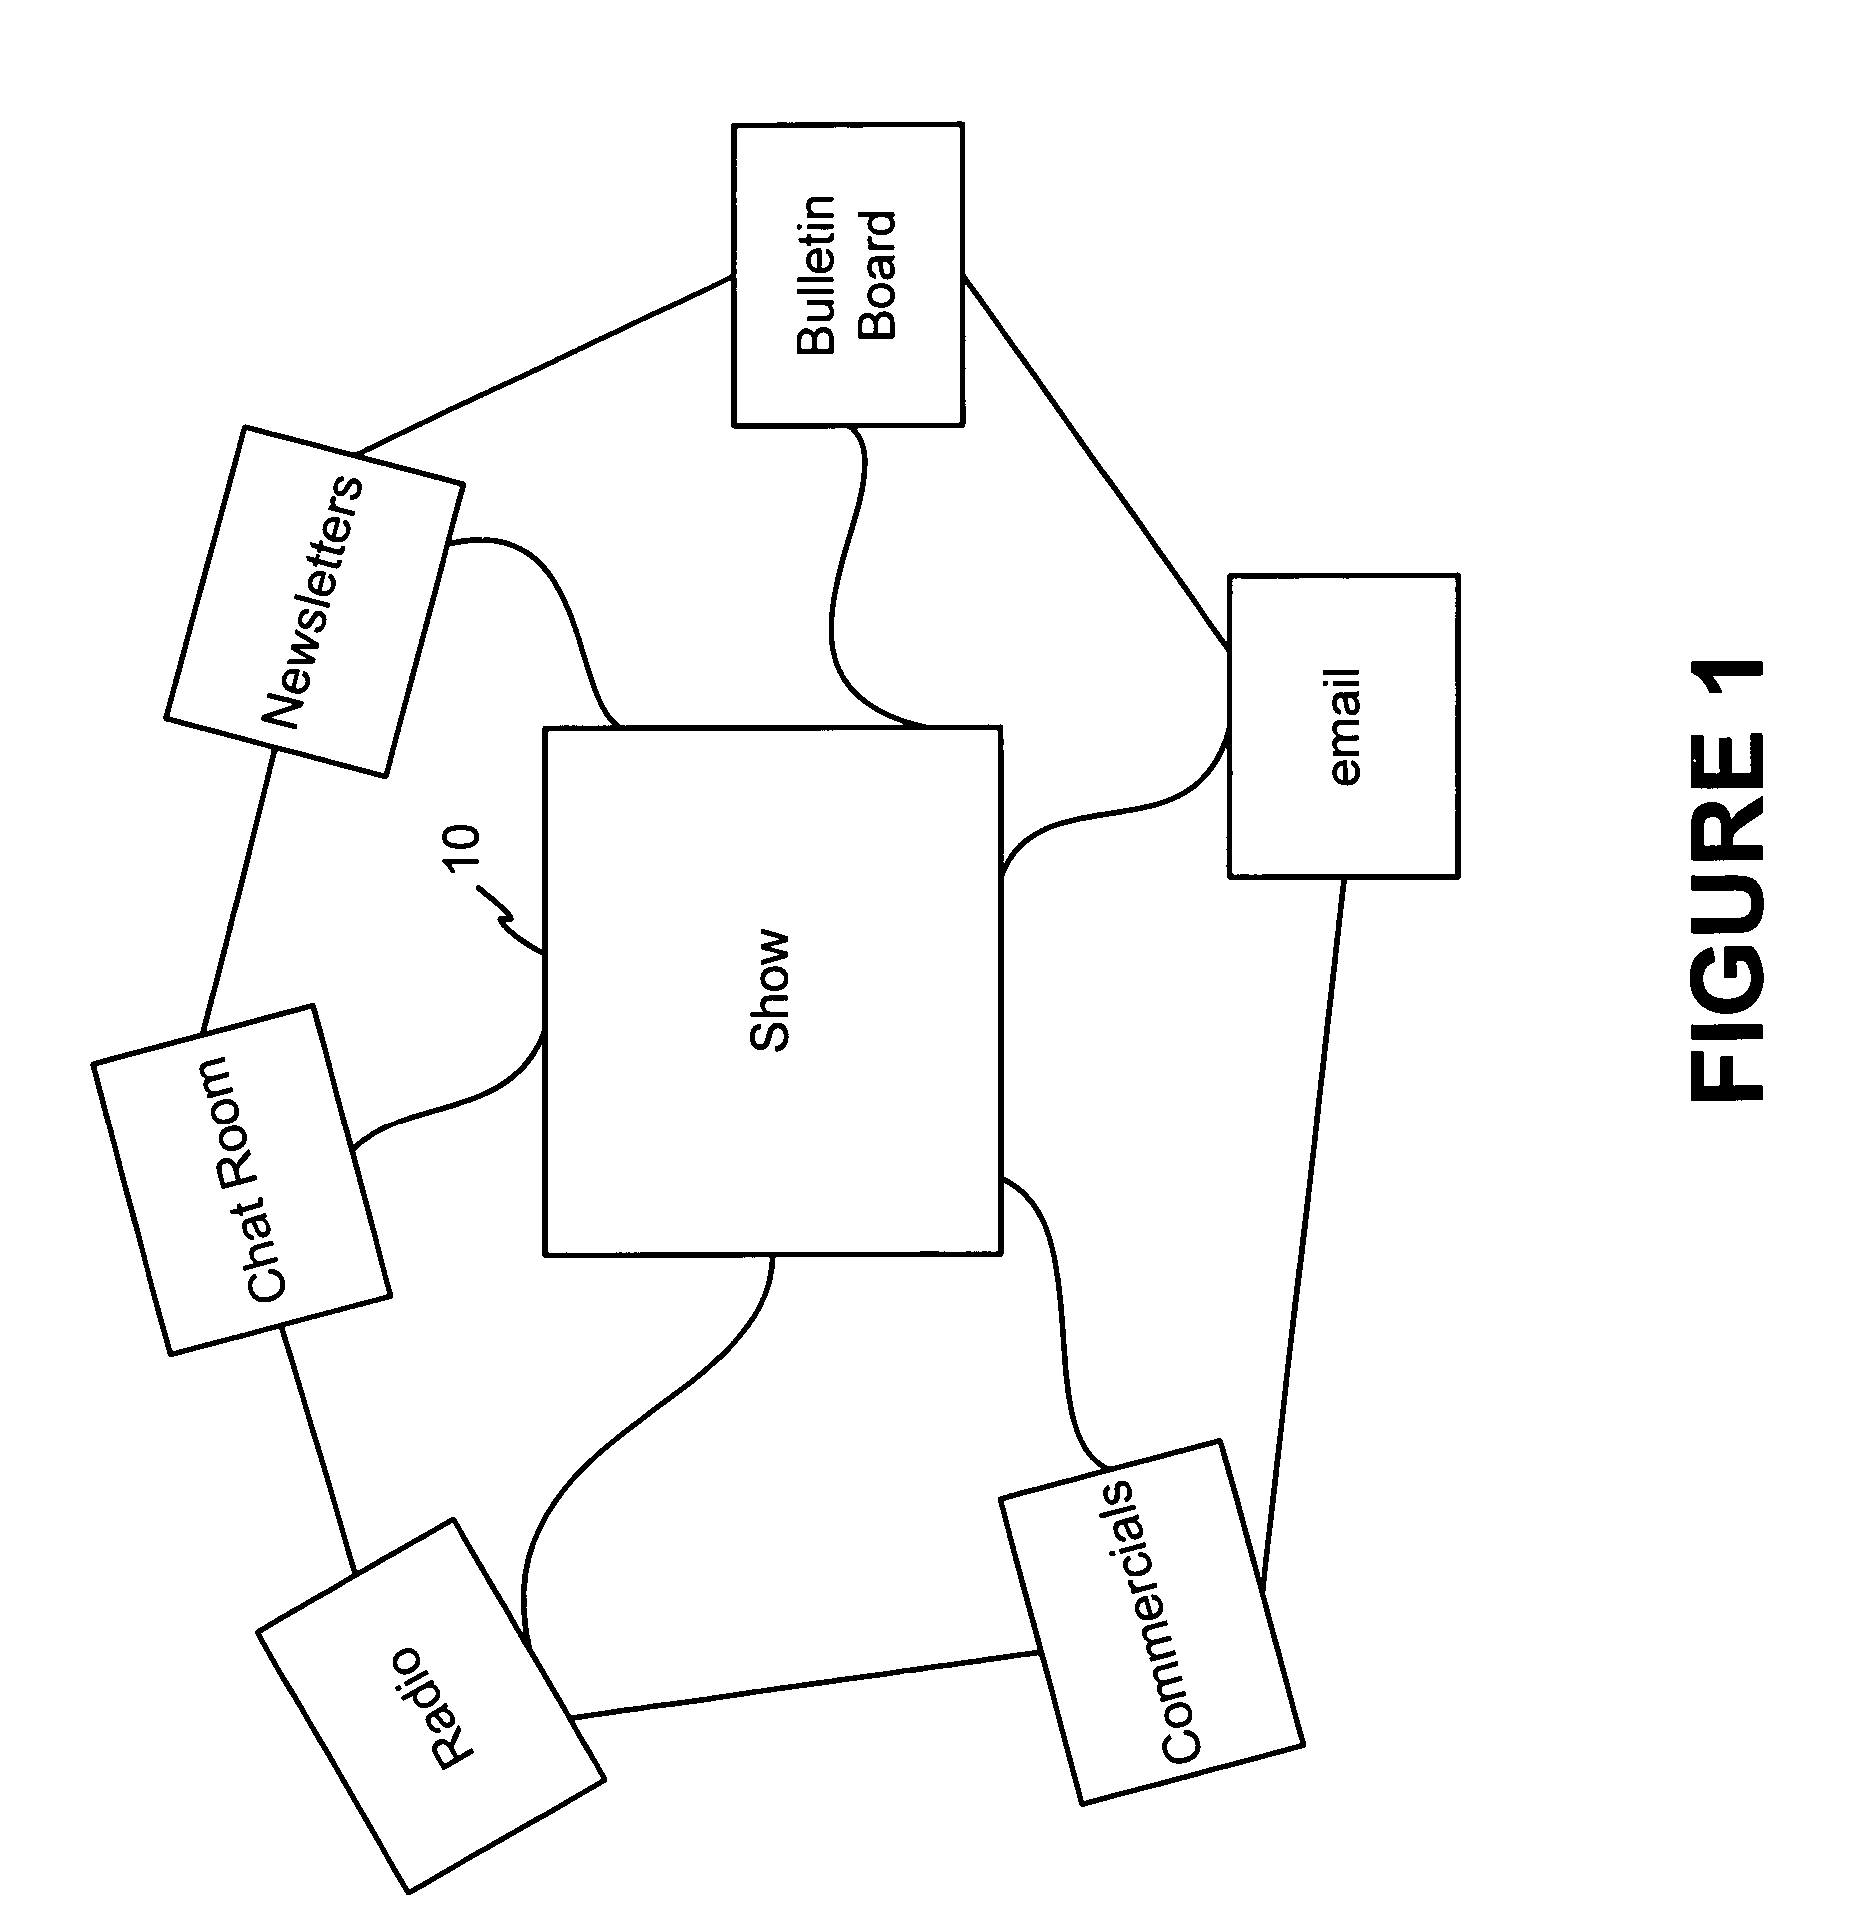 System and method for incorporation of products and services into reality television